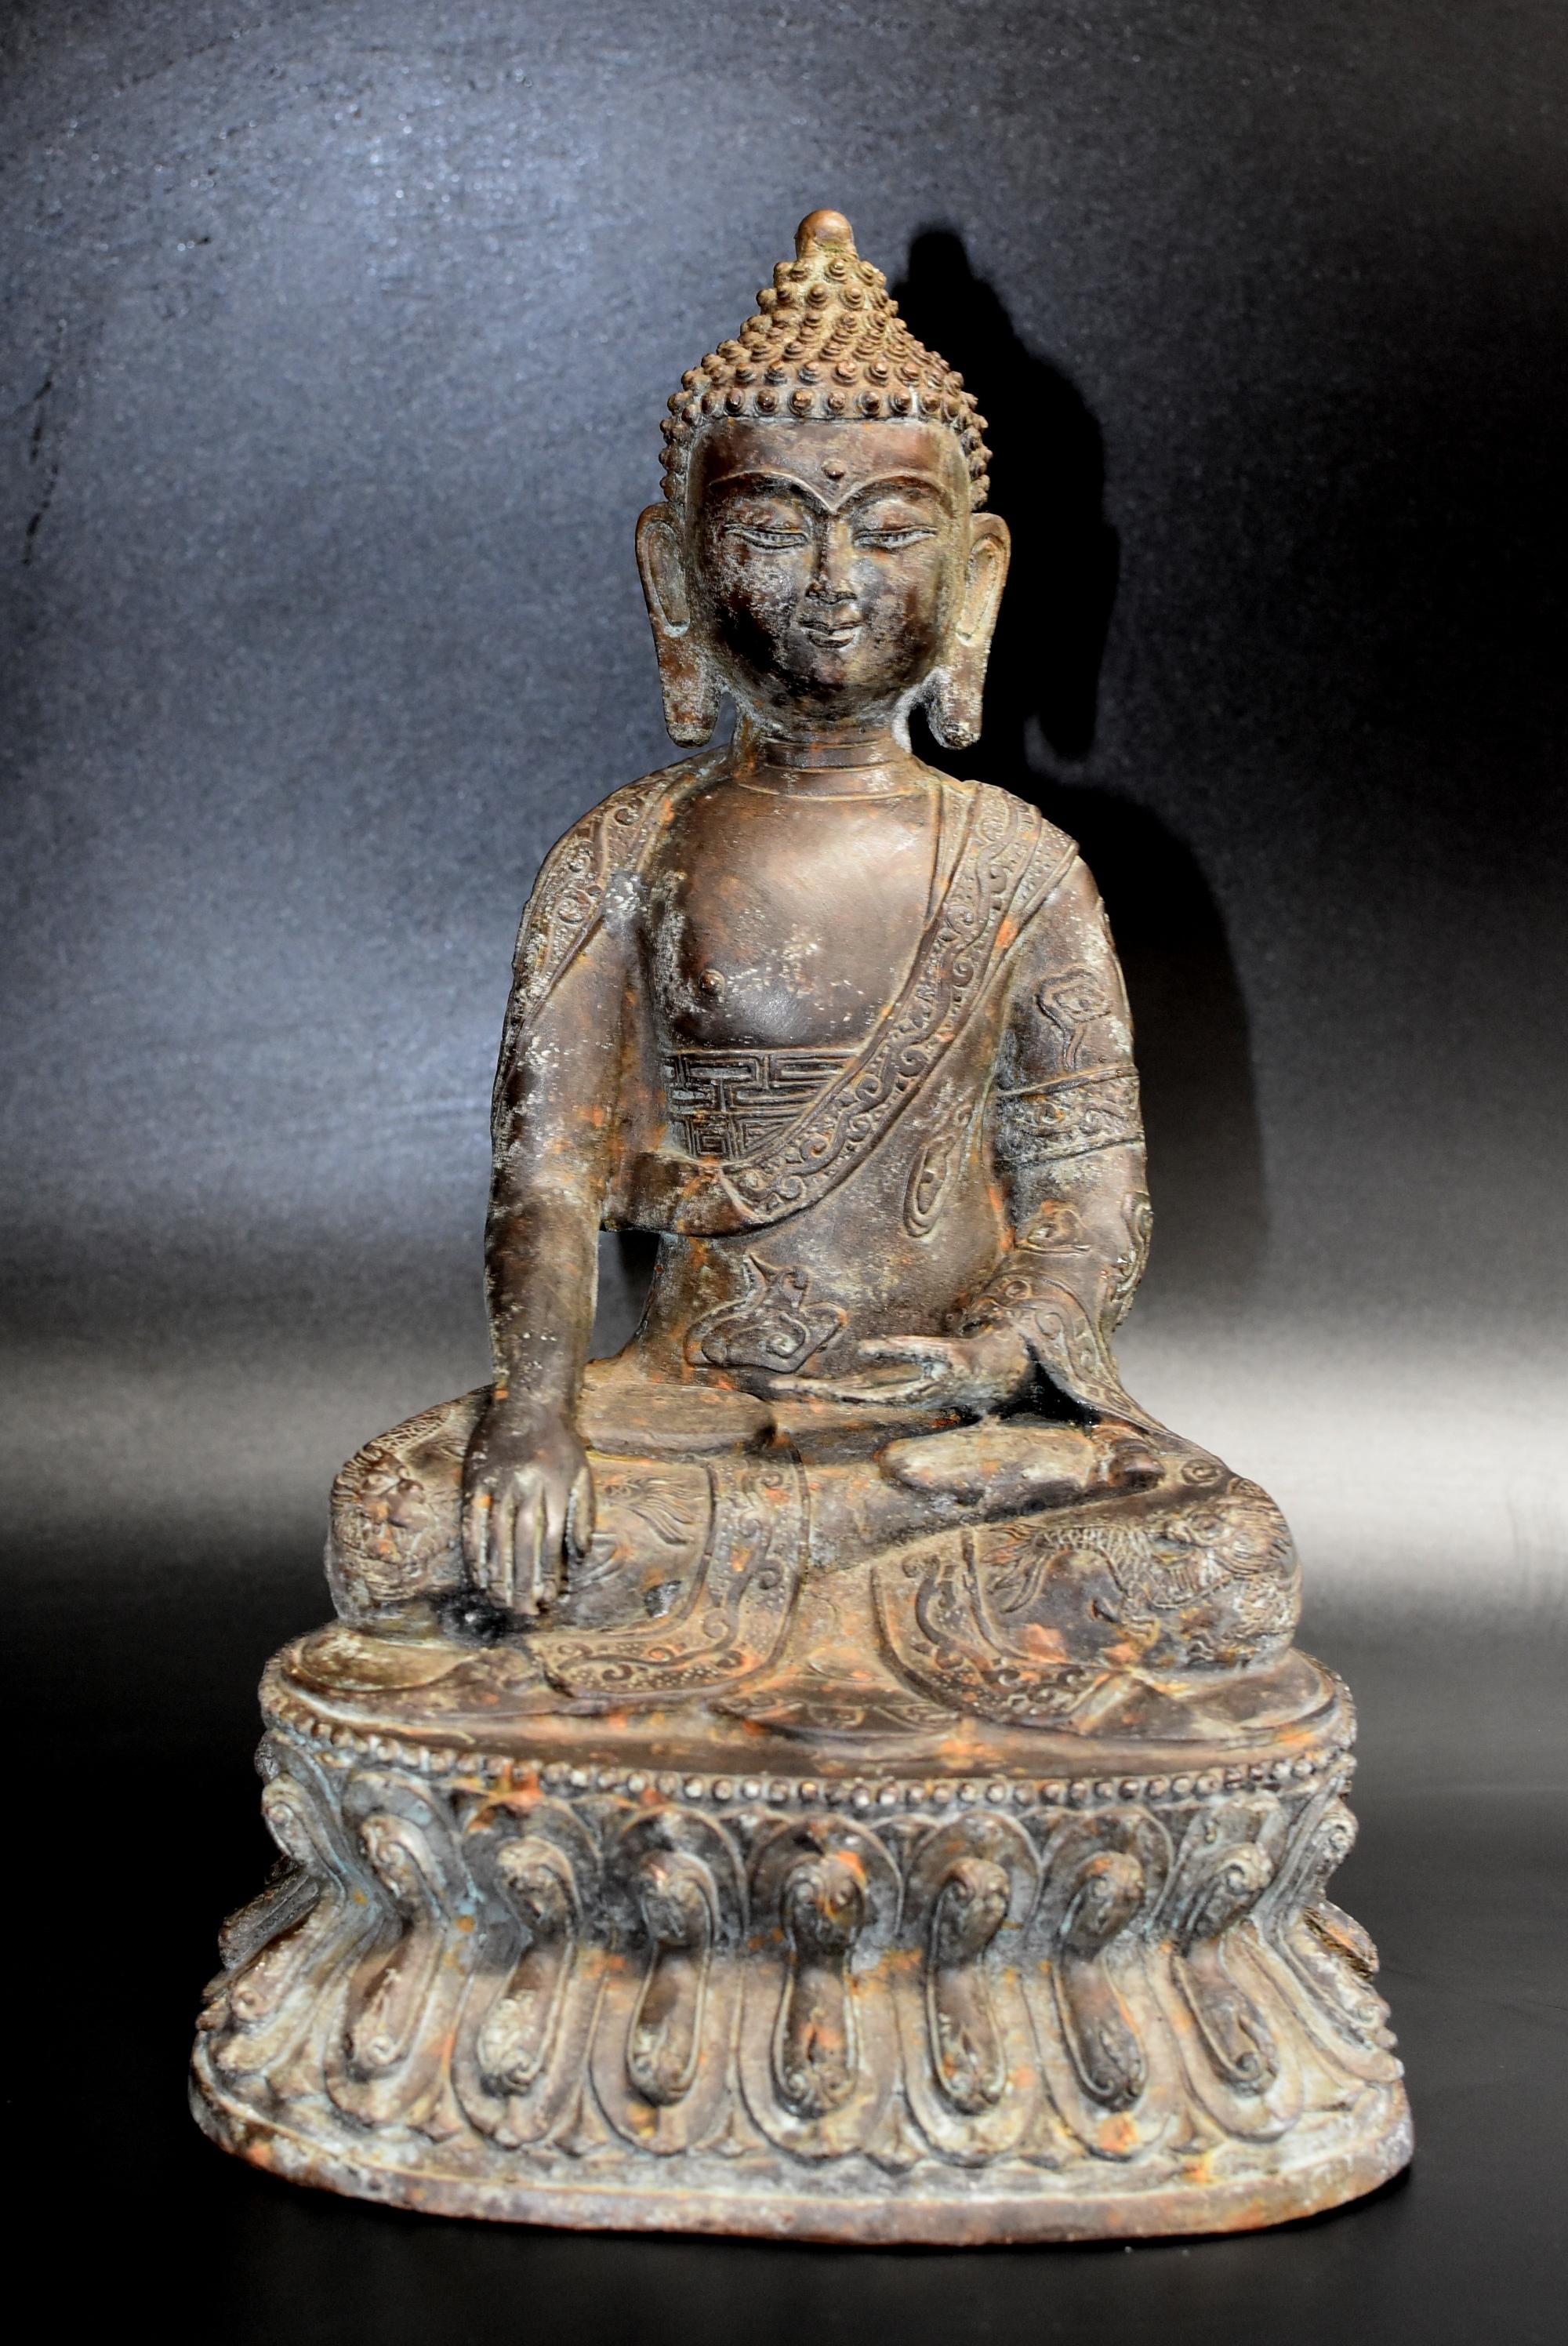 Exceptional value! A beautiful, large bronze statue of a Buddha. Buddha is seated on a lotus throne and is wearing an elaborately decorated robe with motifs of clouds, dragons, foliage and scrolls. A Tang dynasty style full face, refined facial